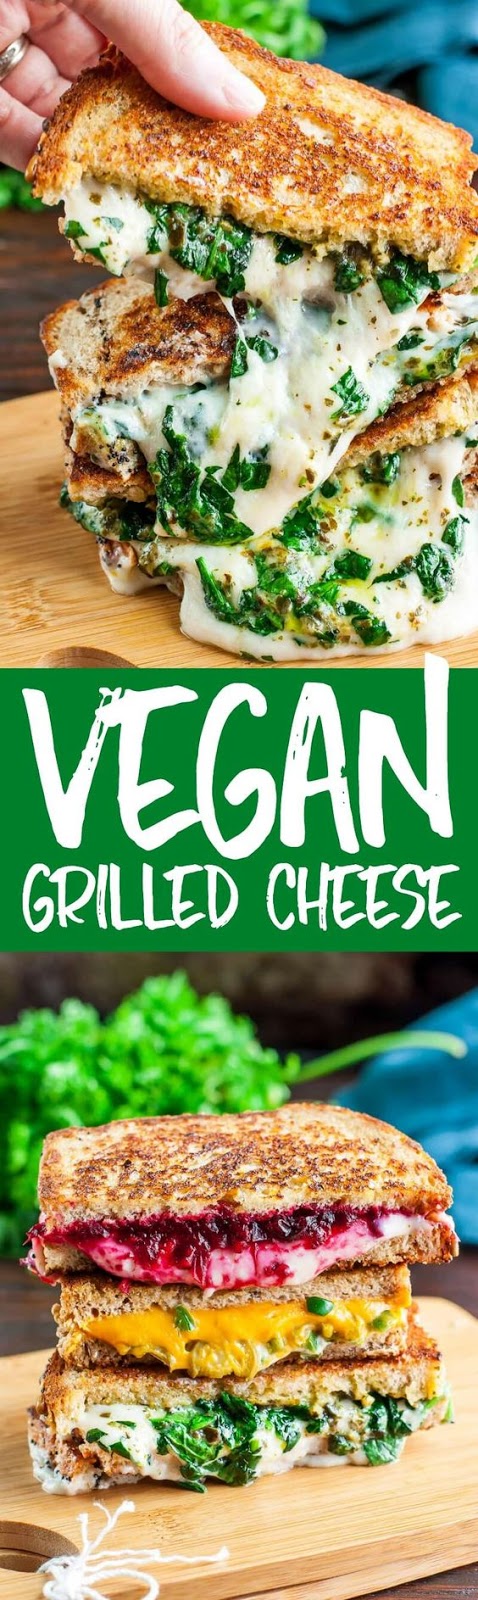 VEGAN GRILLED CHEESE SANDWICHES